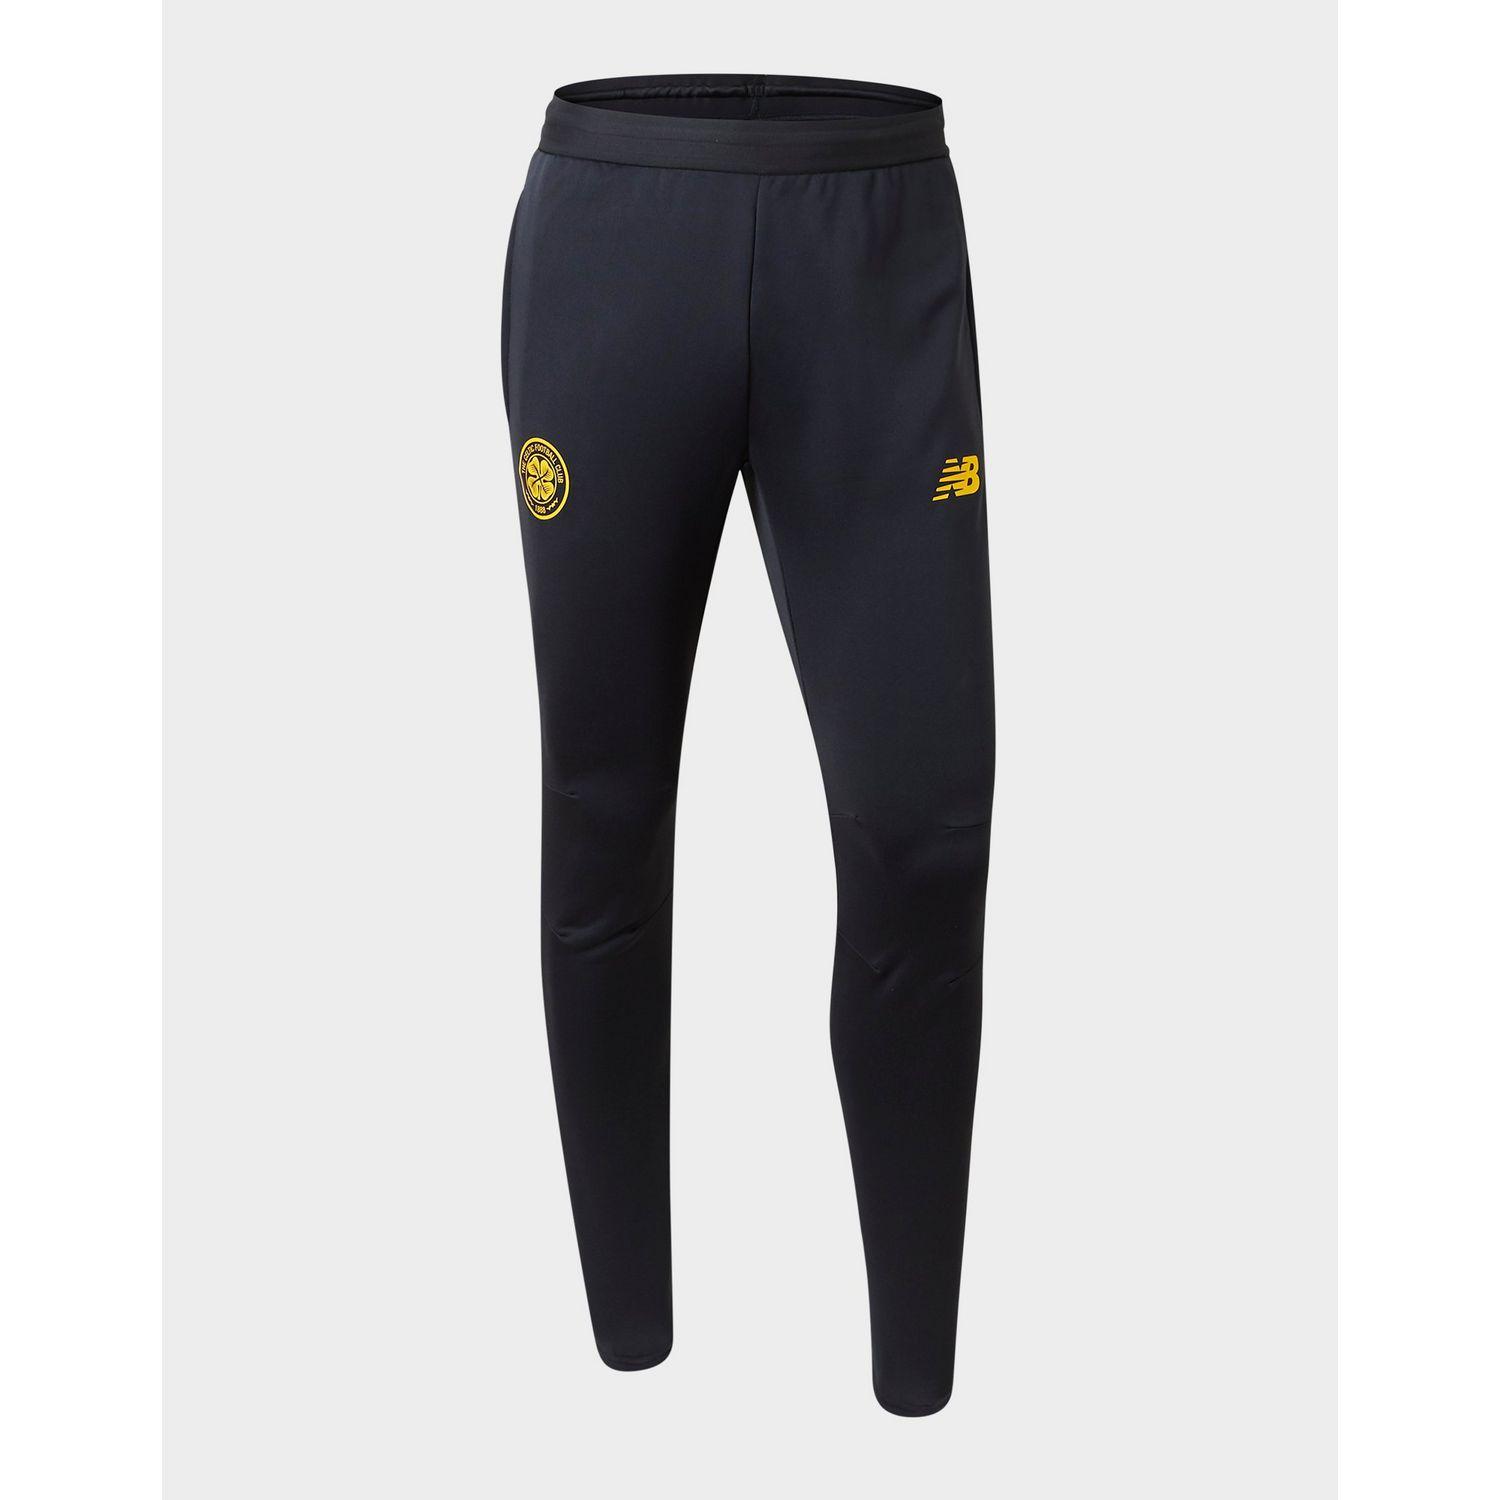 New Balance Synthetic Celtic Fc Slim Track Pants in Black for Men - Lyst